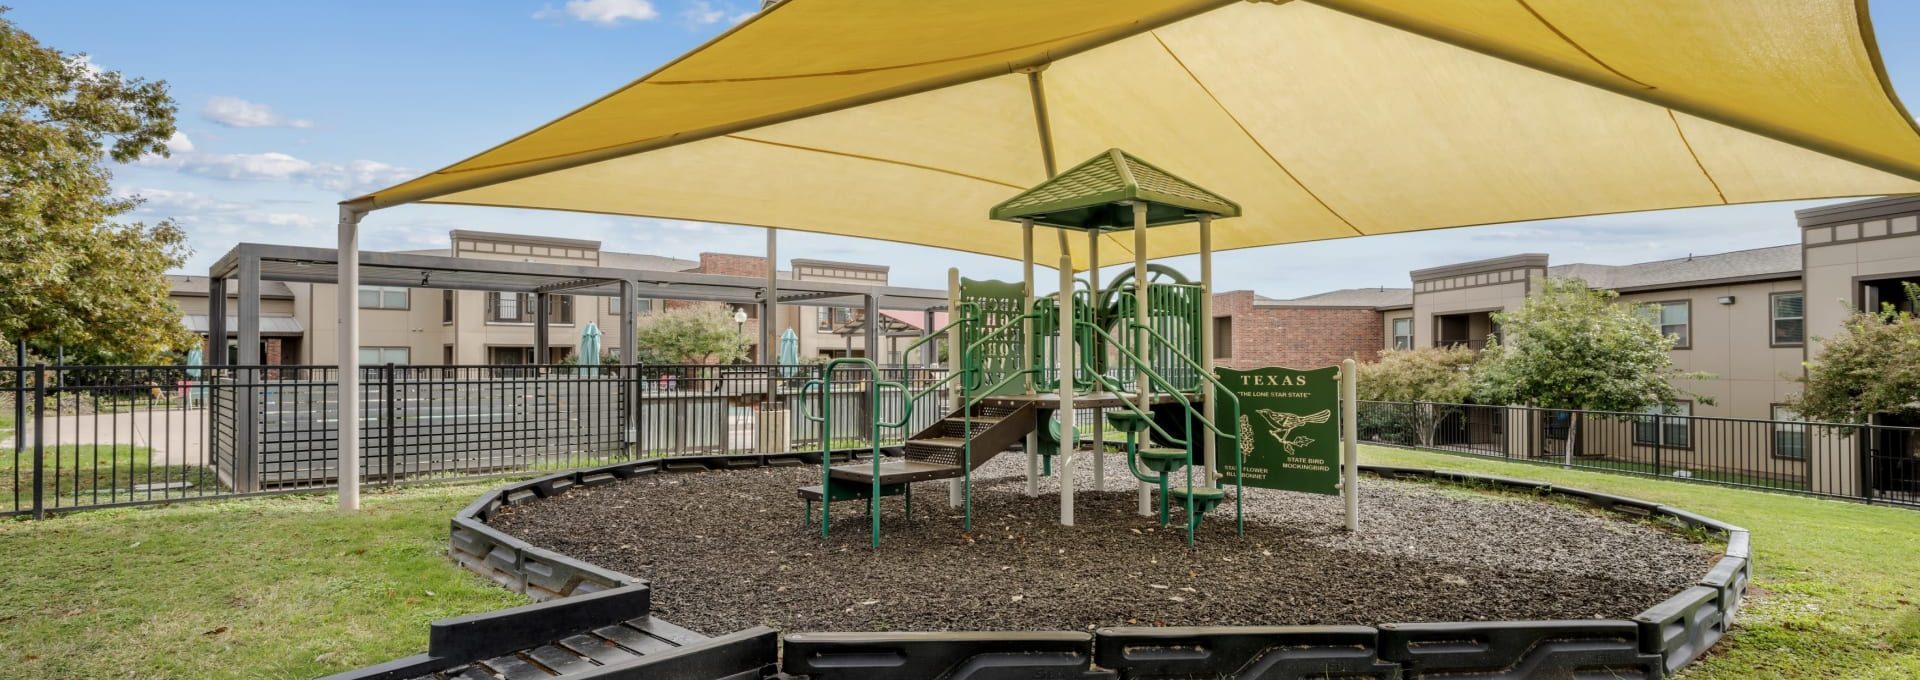 a playground area with a yellow canopy and a slide at The  BLVD